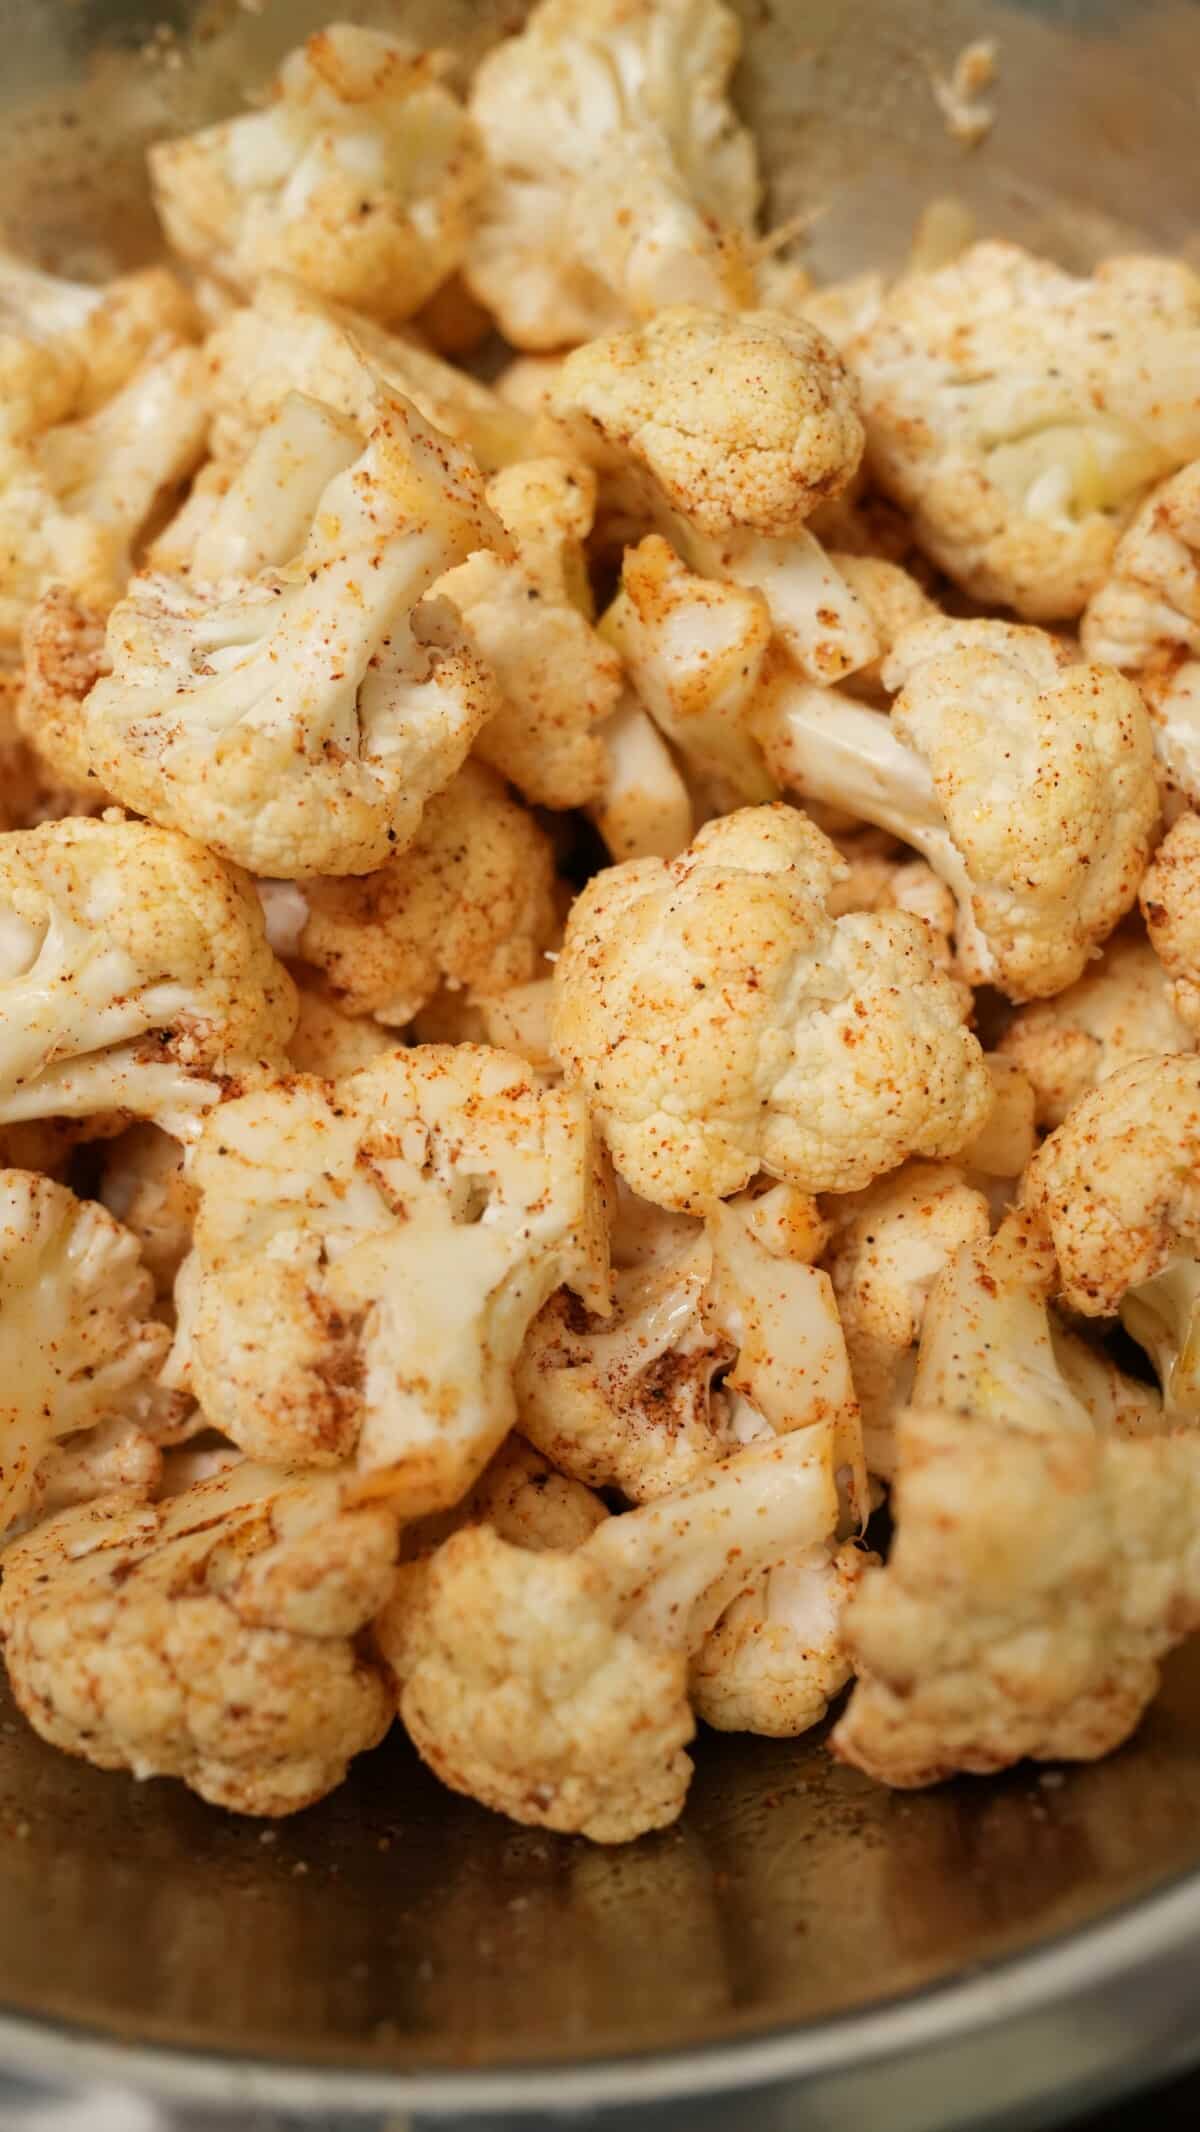 Cauliflower florets seasoned in a bowl with spice and olive oil.